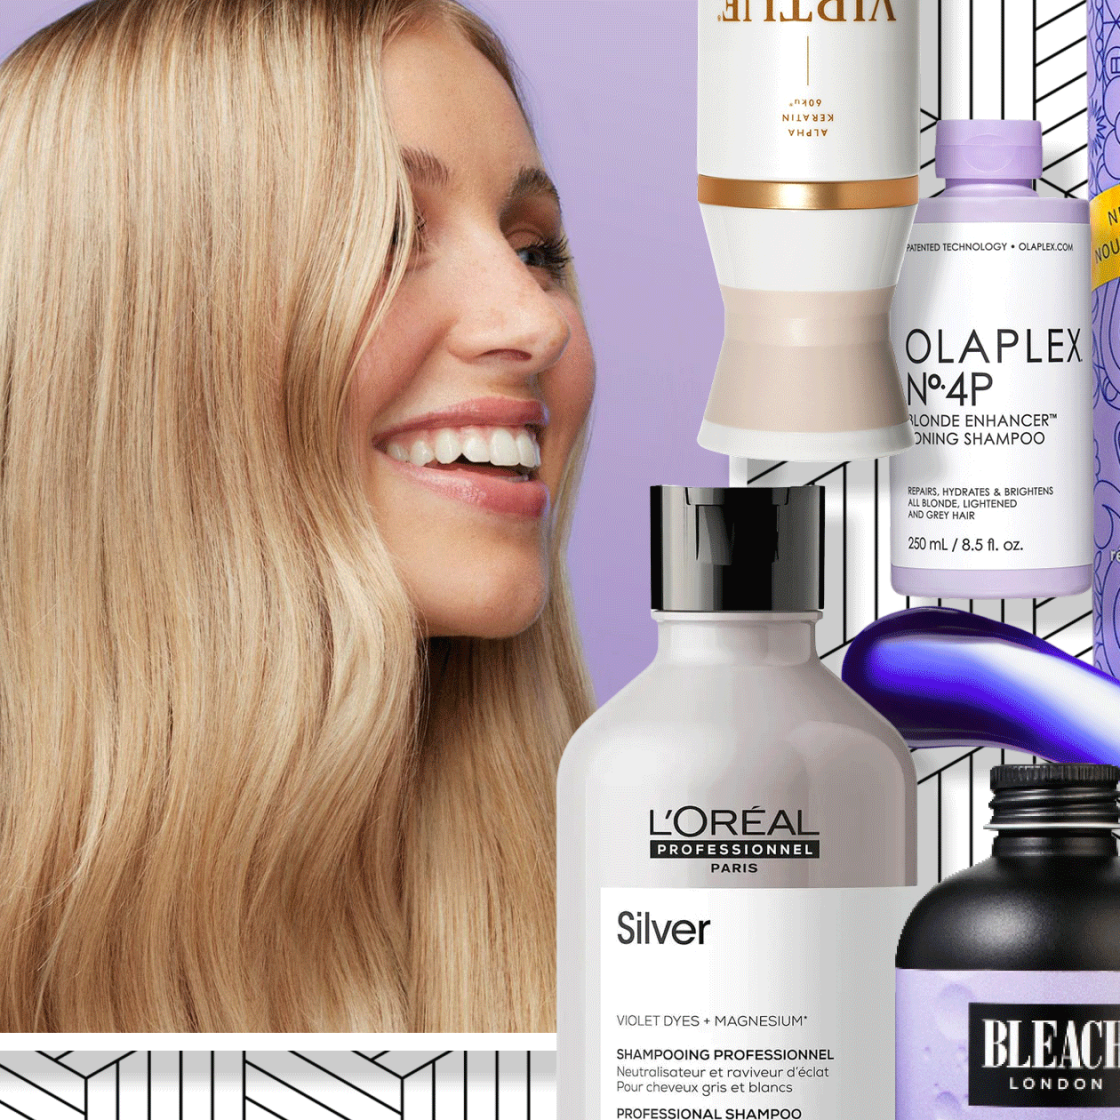 bang farmaceut værktøj The best purple shampoos for keeping your blonde bright